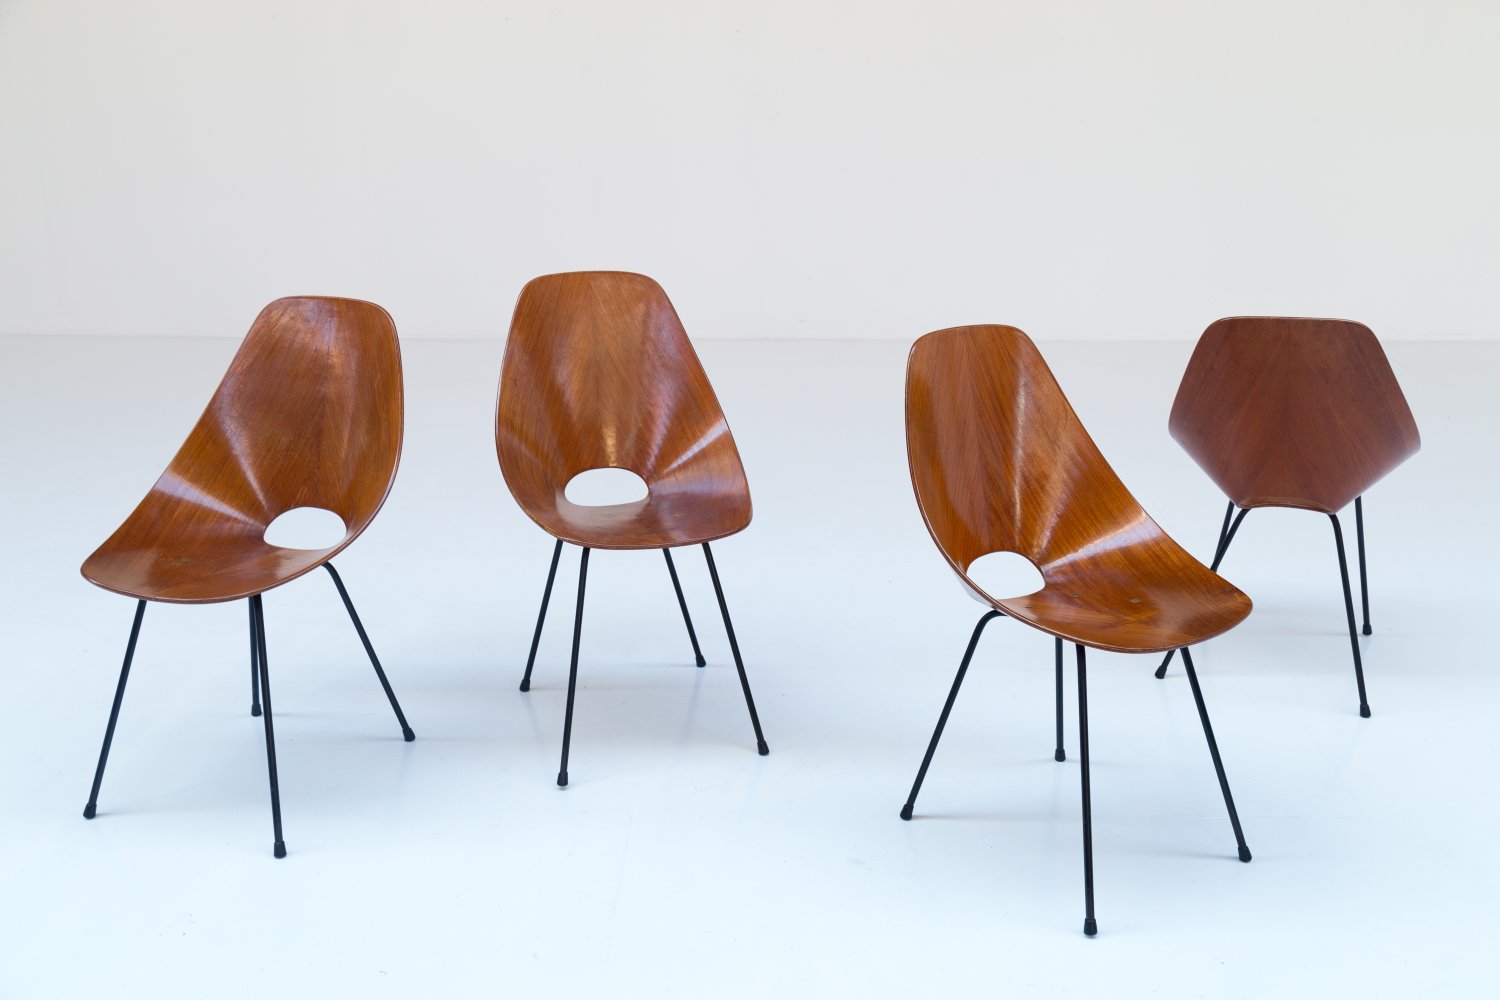 Set of 4 Medea chairs by Vittorio Nobili